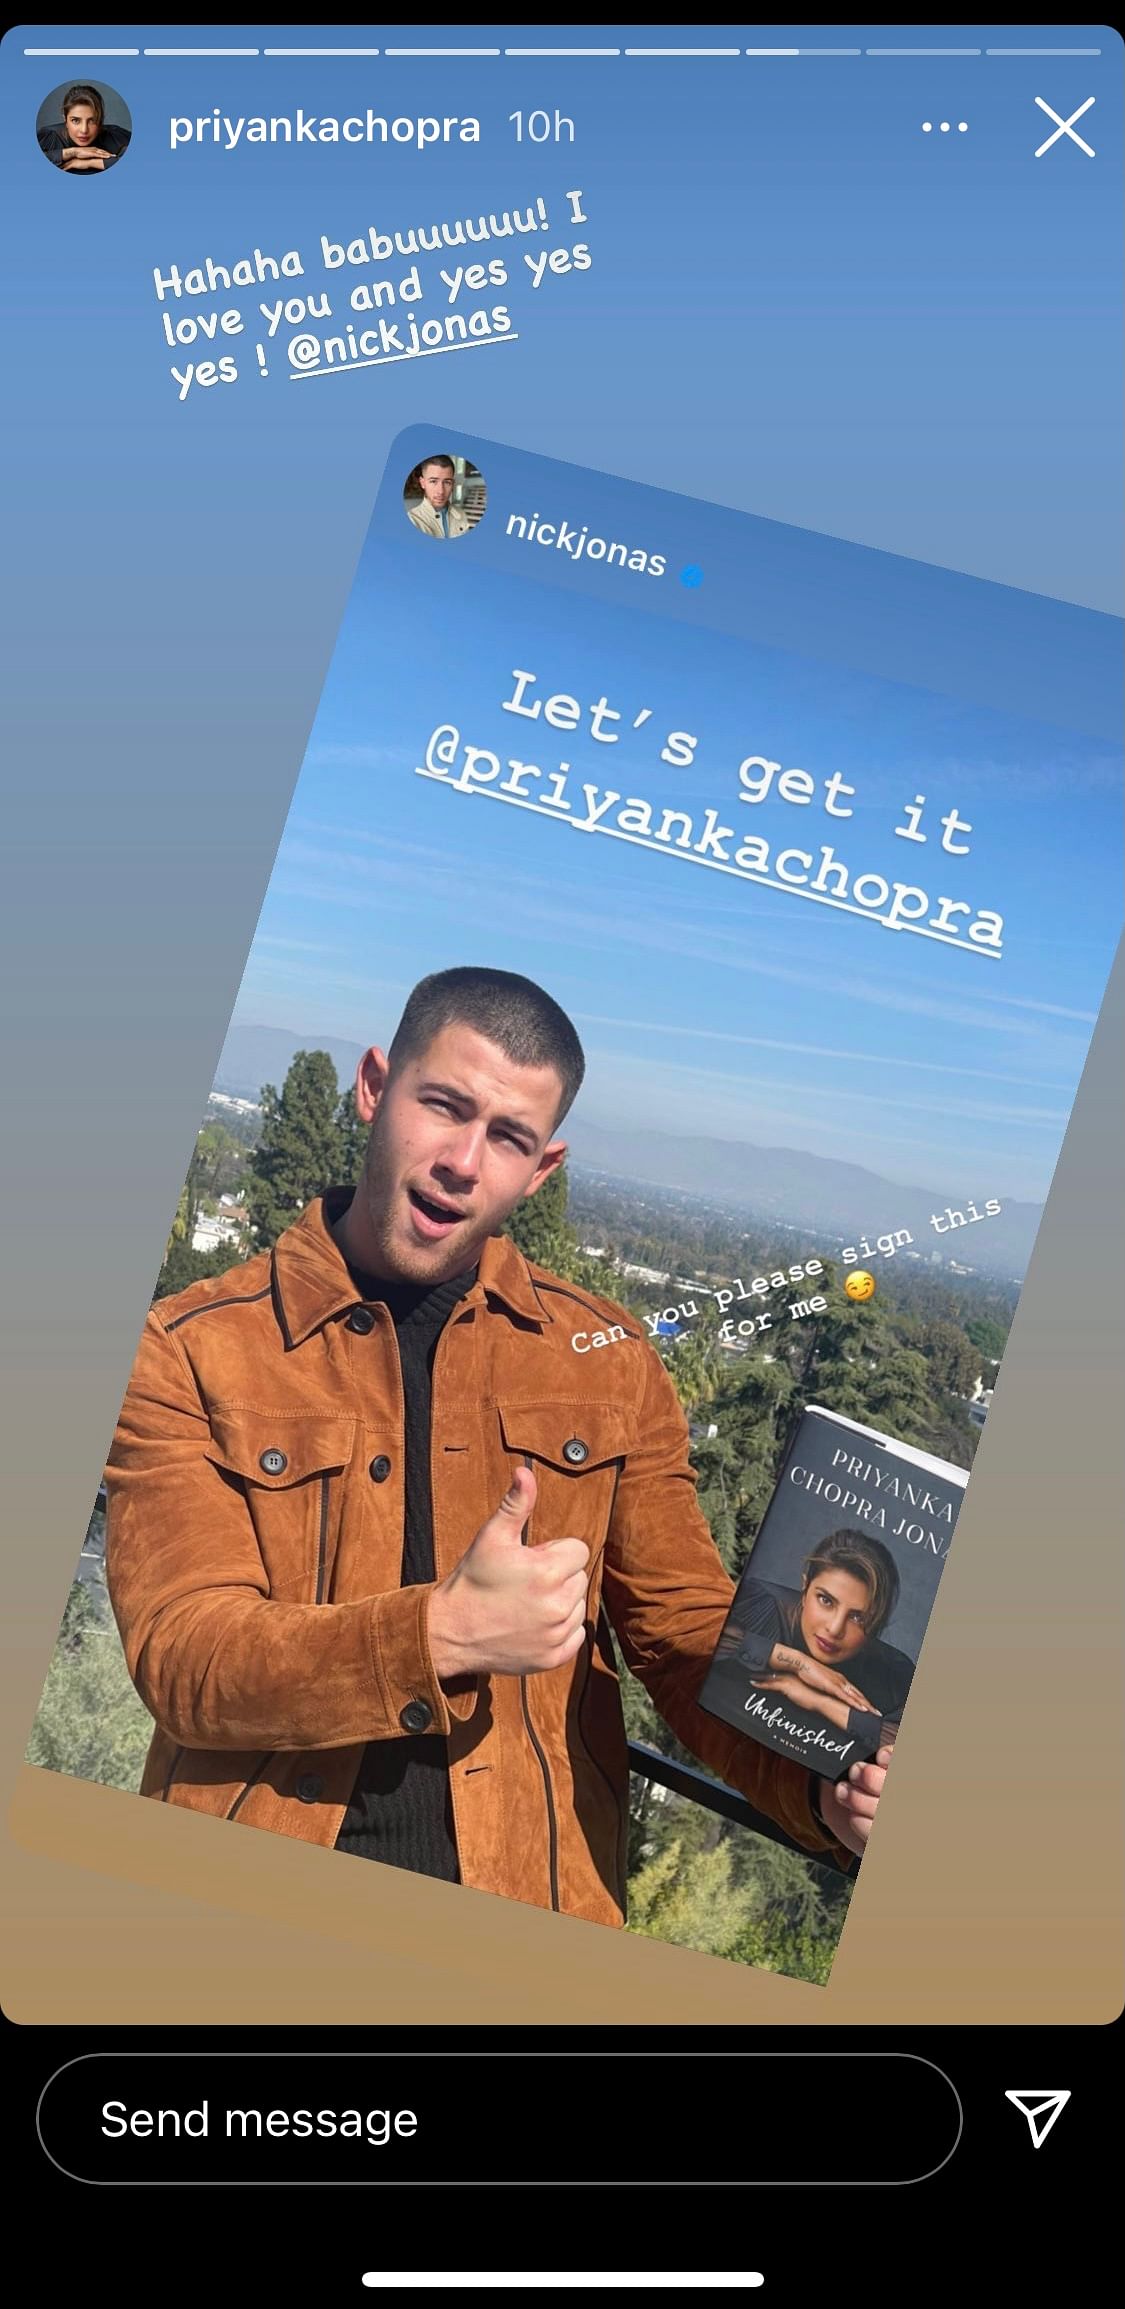 Nick Jonas takes to Instagram to ask Priyanka Chopra for an autographed copy of her book “Unfinished”.